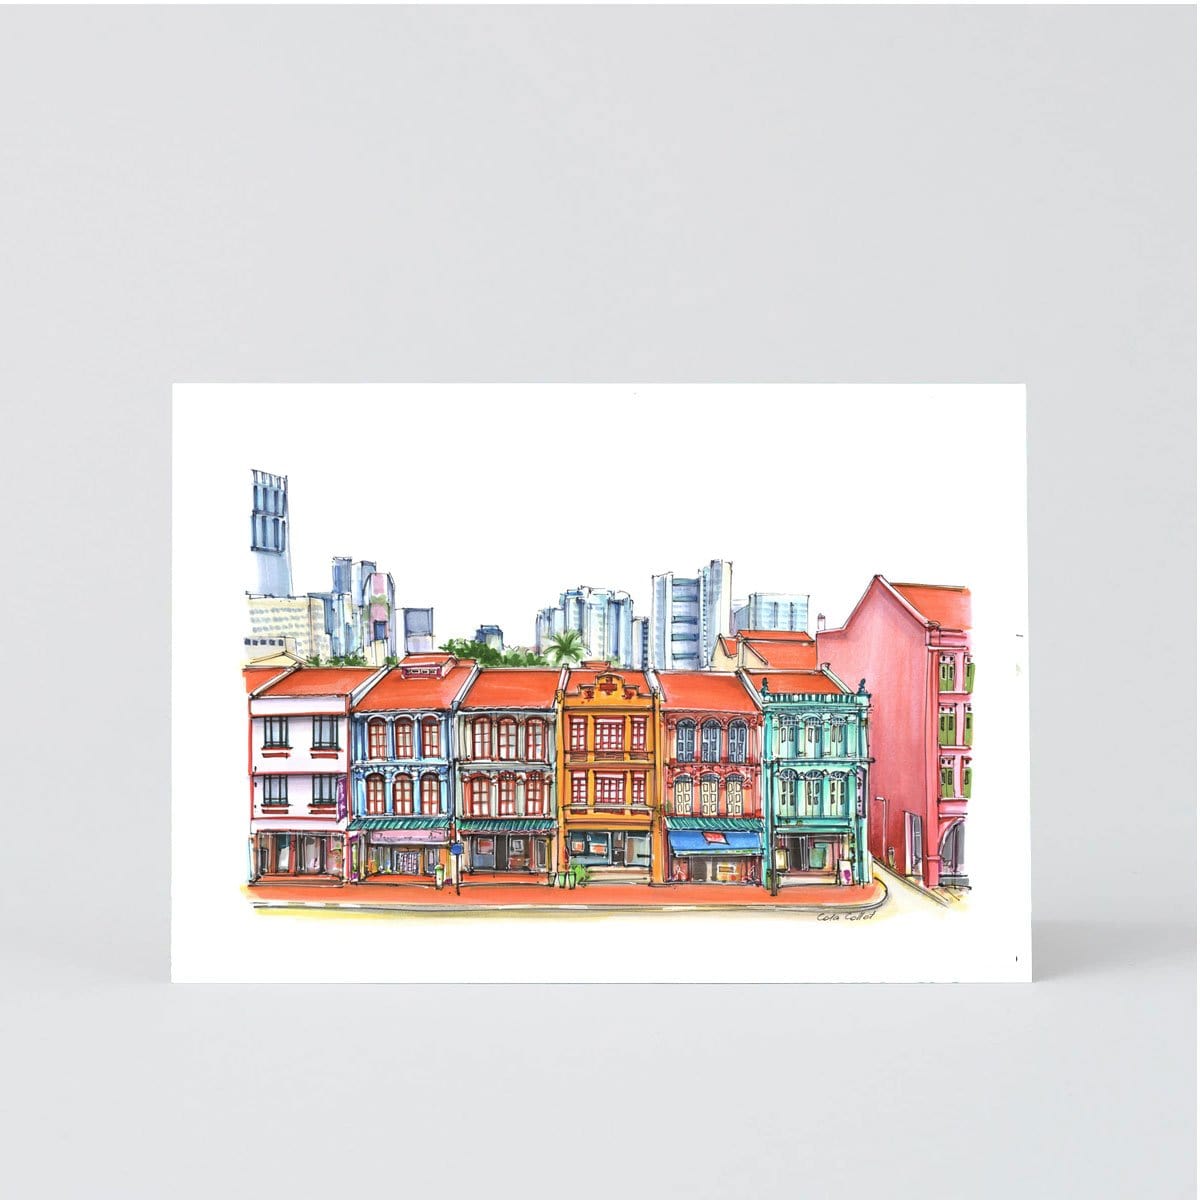 Row of Colourful Shophouses - Upper Cross Street Chinatown Greeting Card